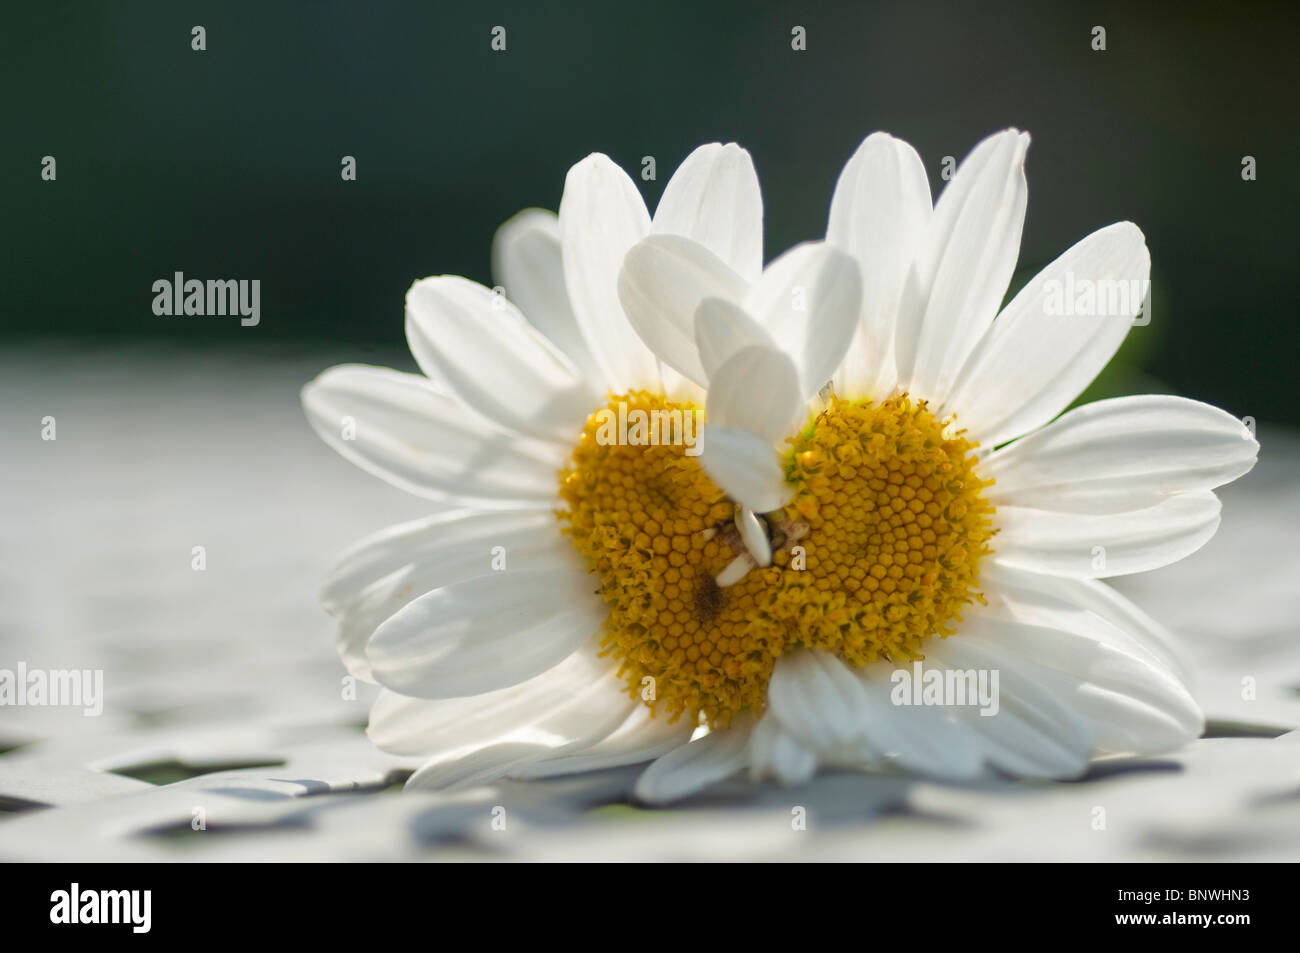 A mutated Shasta daisy with three centers on a table. Stock Photo